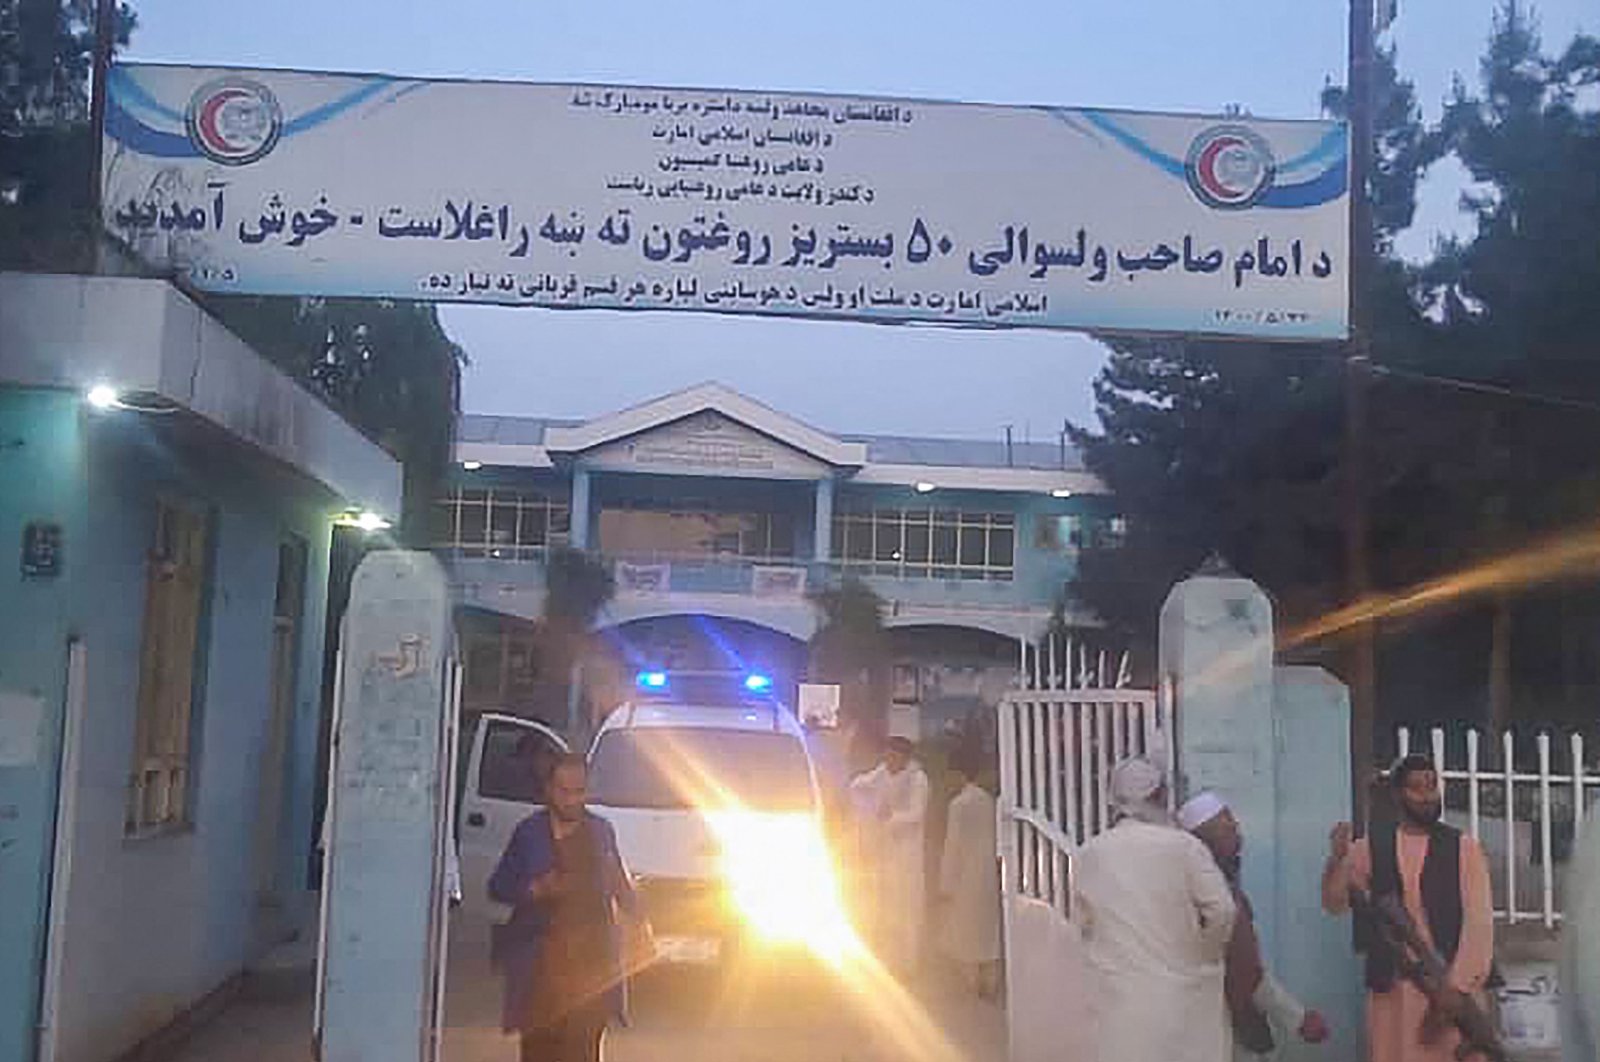 Taliban fighters and medical staff stand outside the gate of a hospital as they prepare to attend to the casualties after an explosion at the Imam Sahib district in Kunduz province, Afghanistan, April 22, 2022. (AFP Photo)